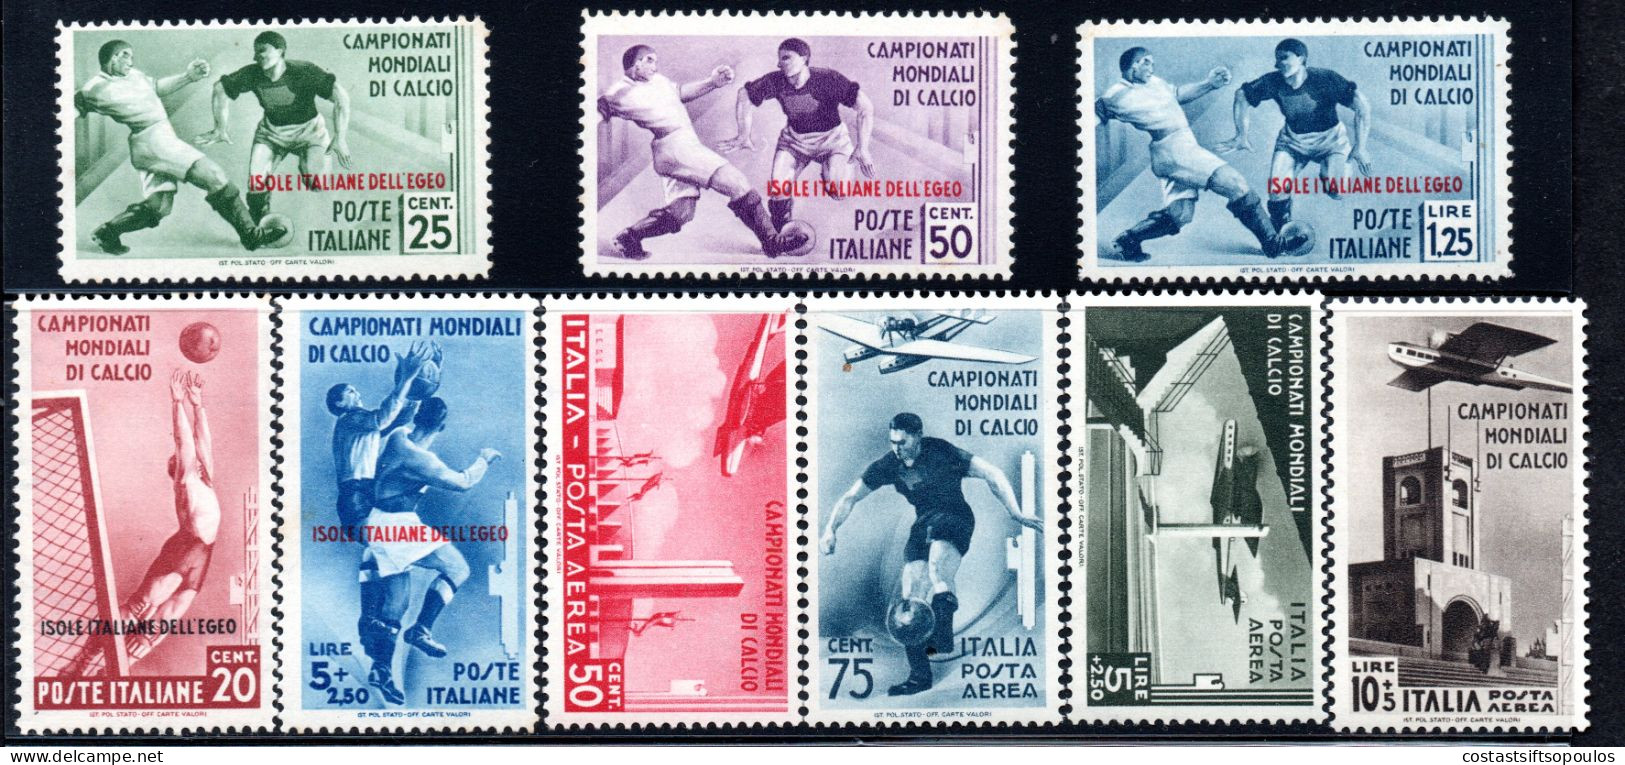 2786. -5.GREECE,ITALY,DODECANESE,1934 SOCCER,FOOTBALL,SC.31-35, C28-C31MNH.LIGHT GUM BLEMISHES, SEE SCAN. - Dodekanisos